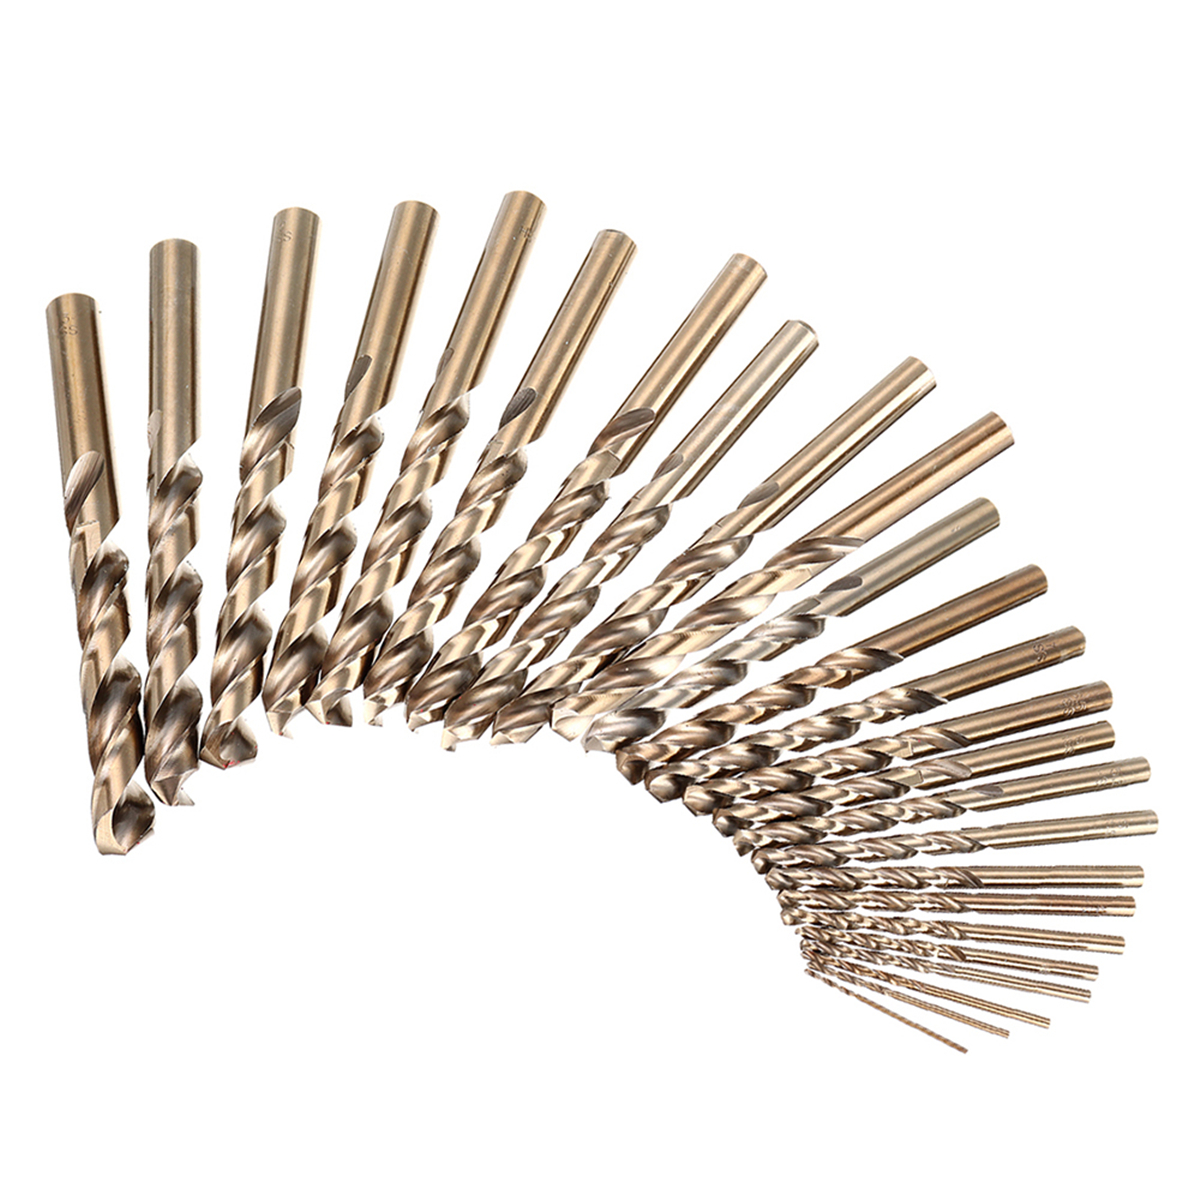 Find 13/19/25 PCS HSS 1 13mm Drillpro M35 Bit Set Cobalt Twist Drill Bit for Sale on Gipsybee.com with cryptocurrencies